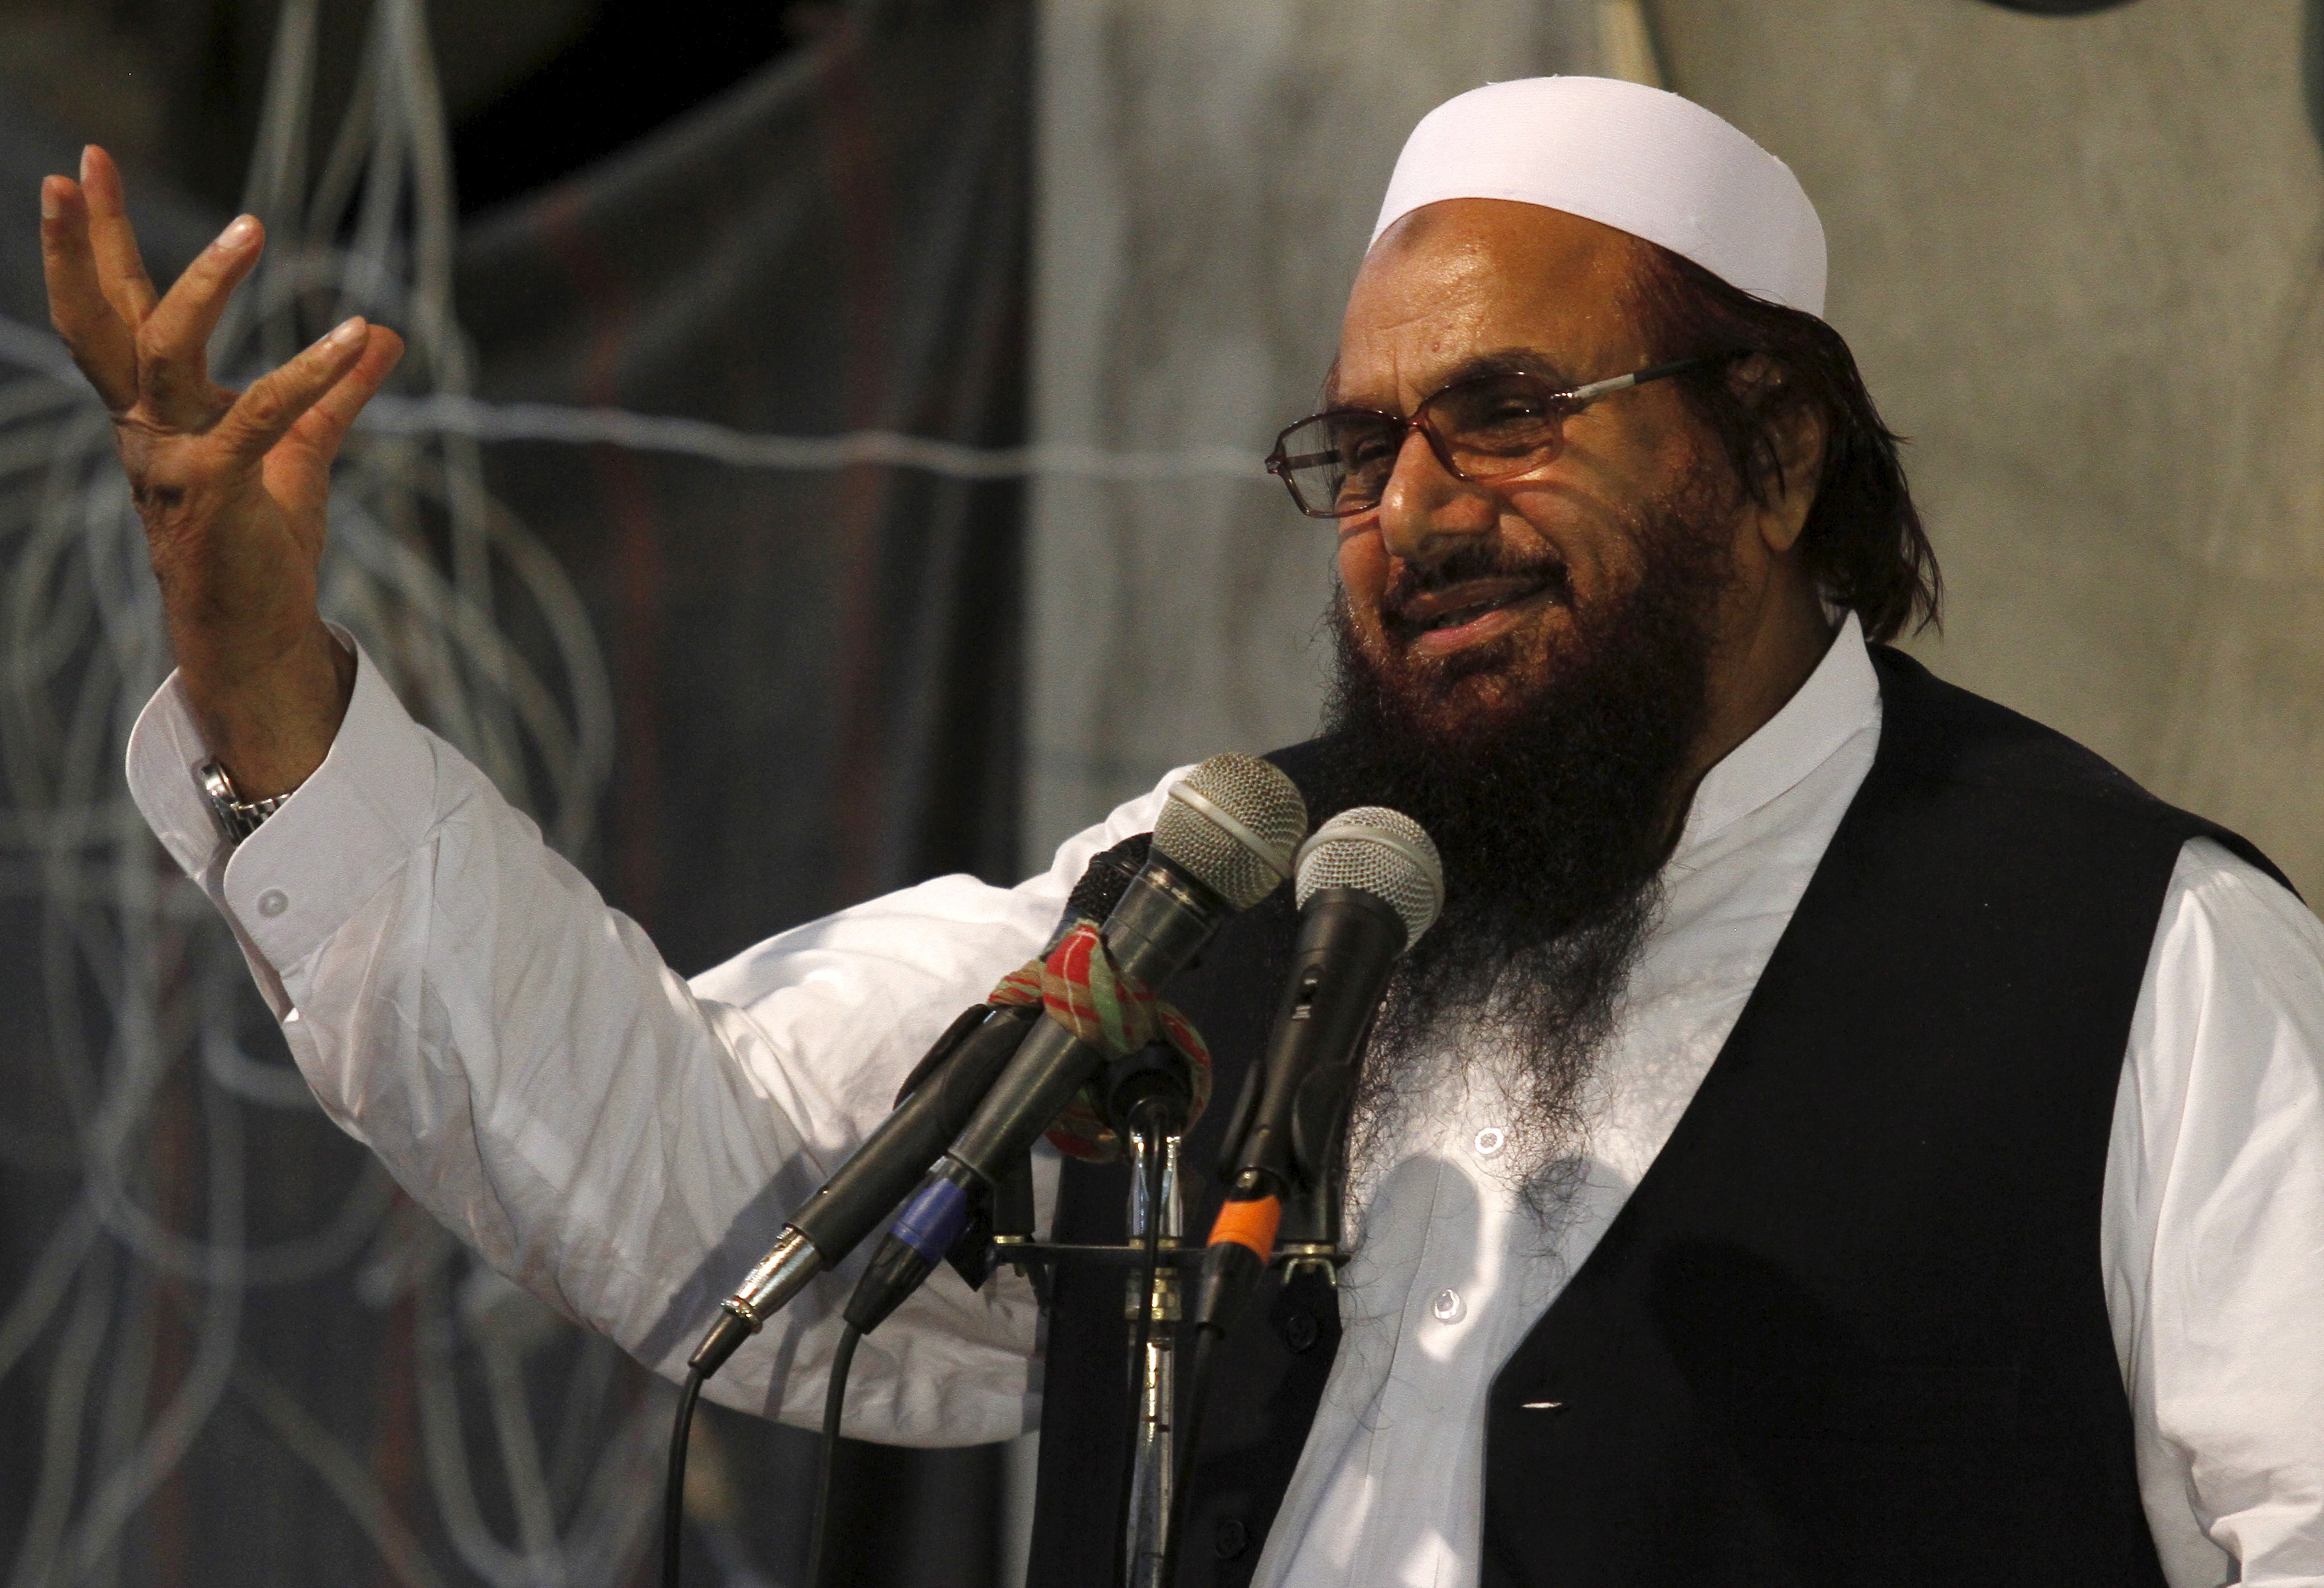 Hafiz Muhammad Saeed, chief of the Jamat-ud-Dawa religious party, addresses the Harmain Sharifain Conference in support of the Saudi Arabian government in Peshawar April 19, 2015. (Fayaz Aziz—Reuters)